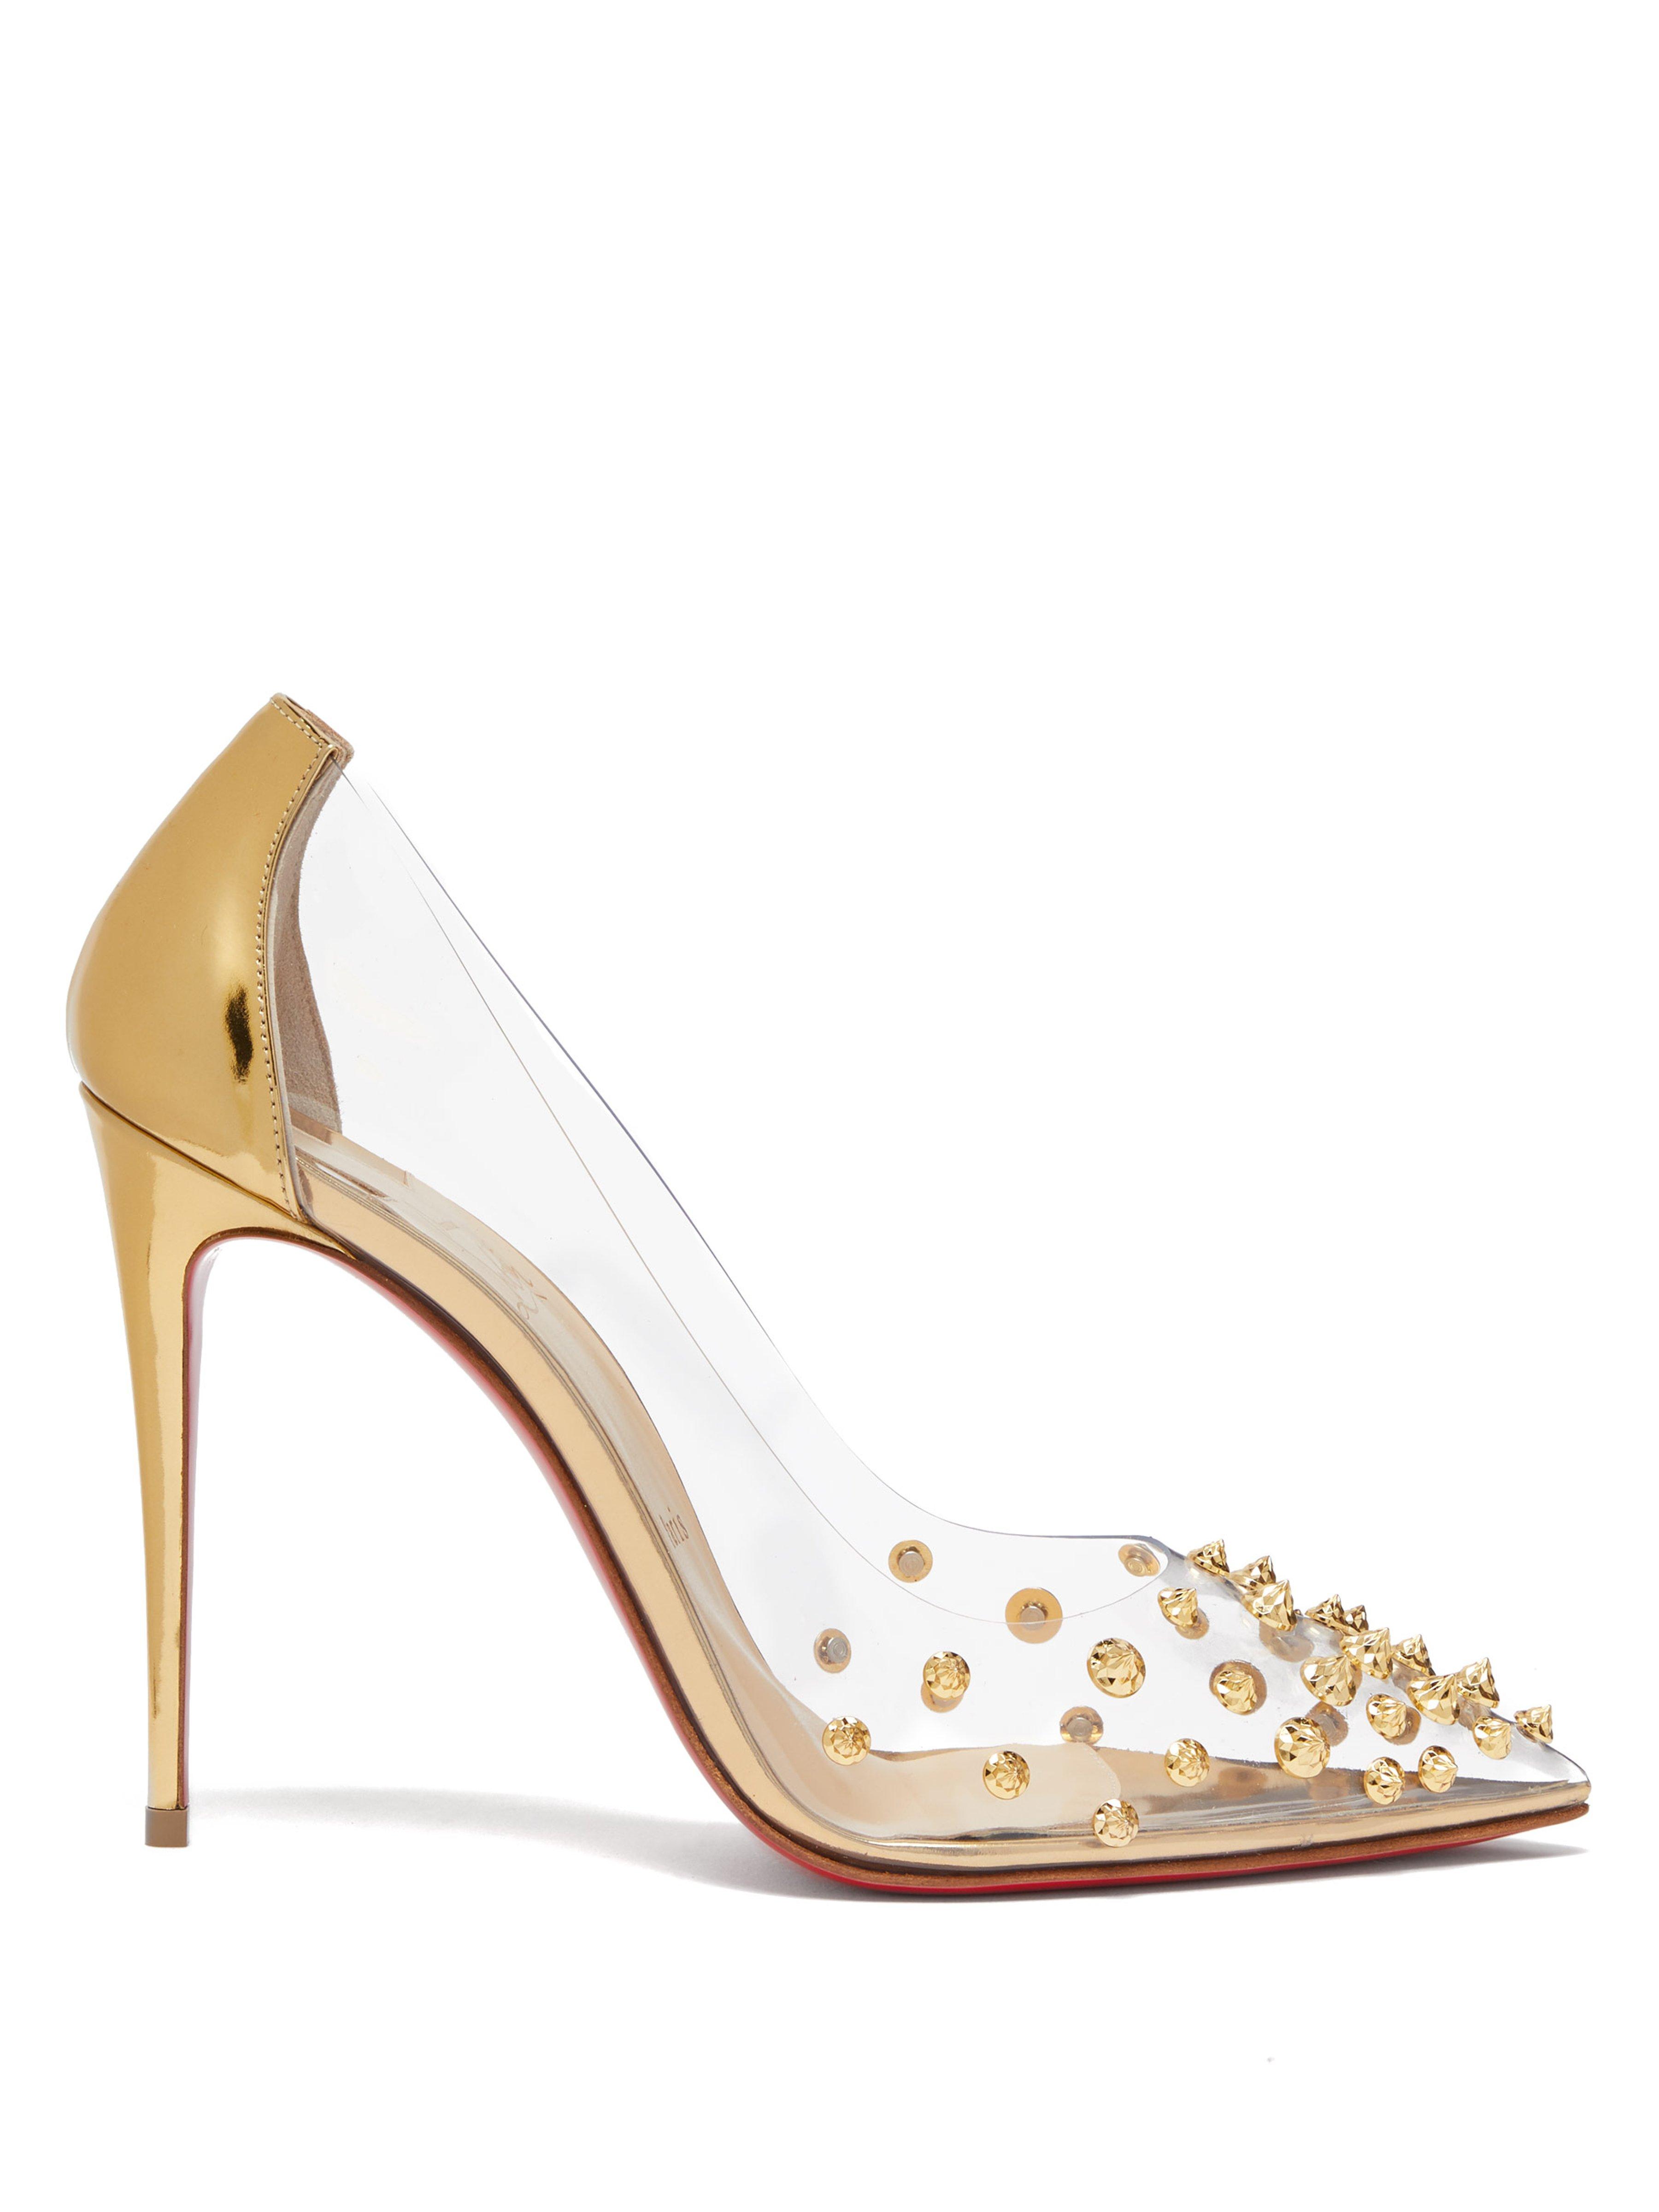 christian louboutin gold spiked heels